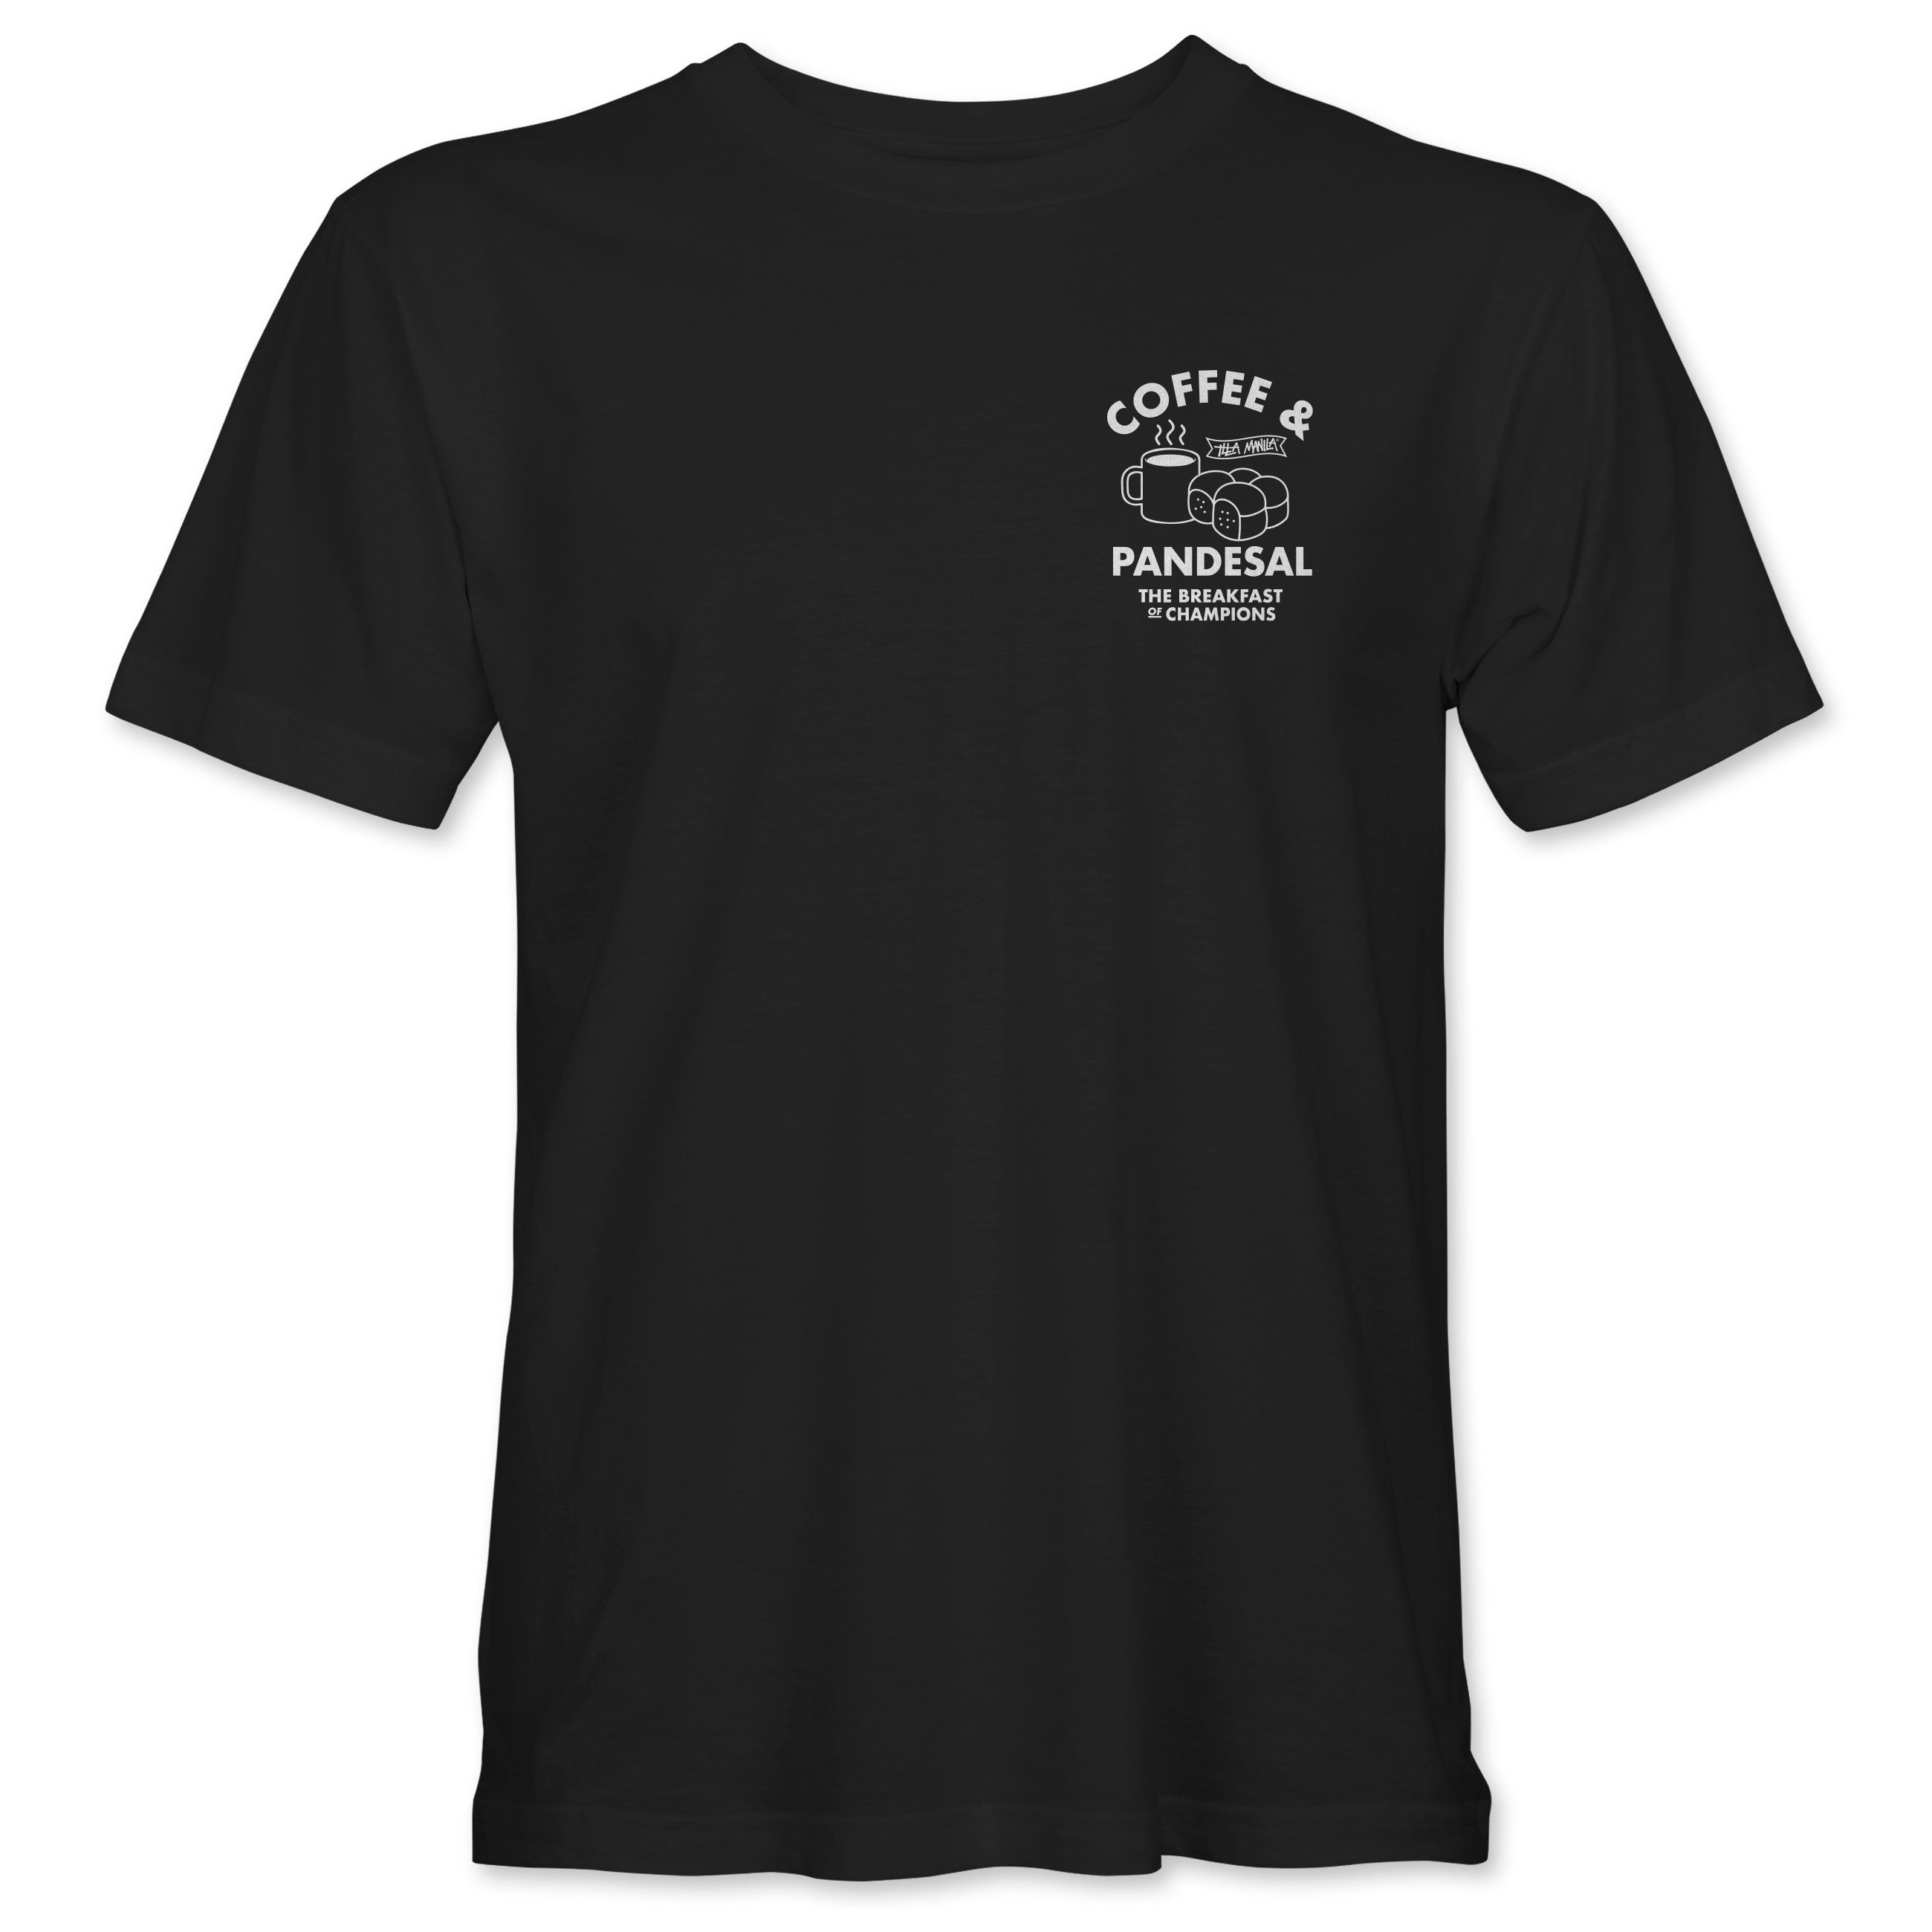 Coffee and Pandesal T-shirt - Black